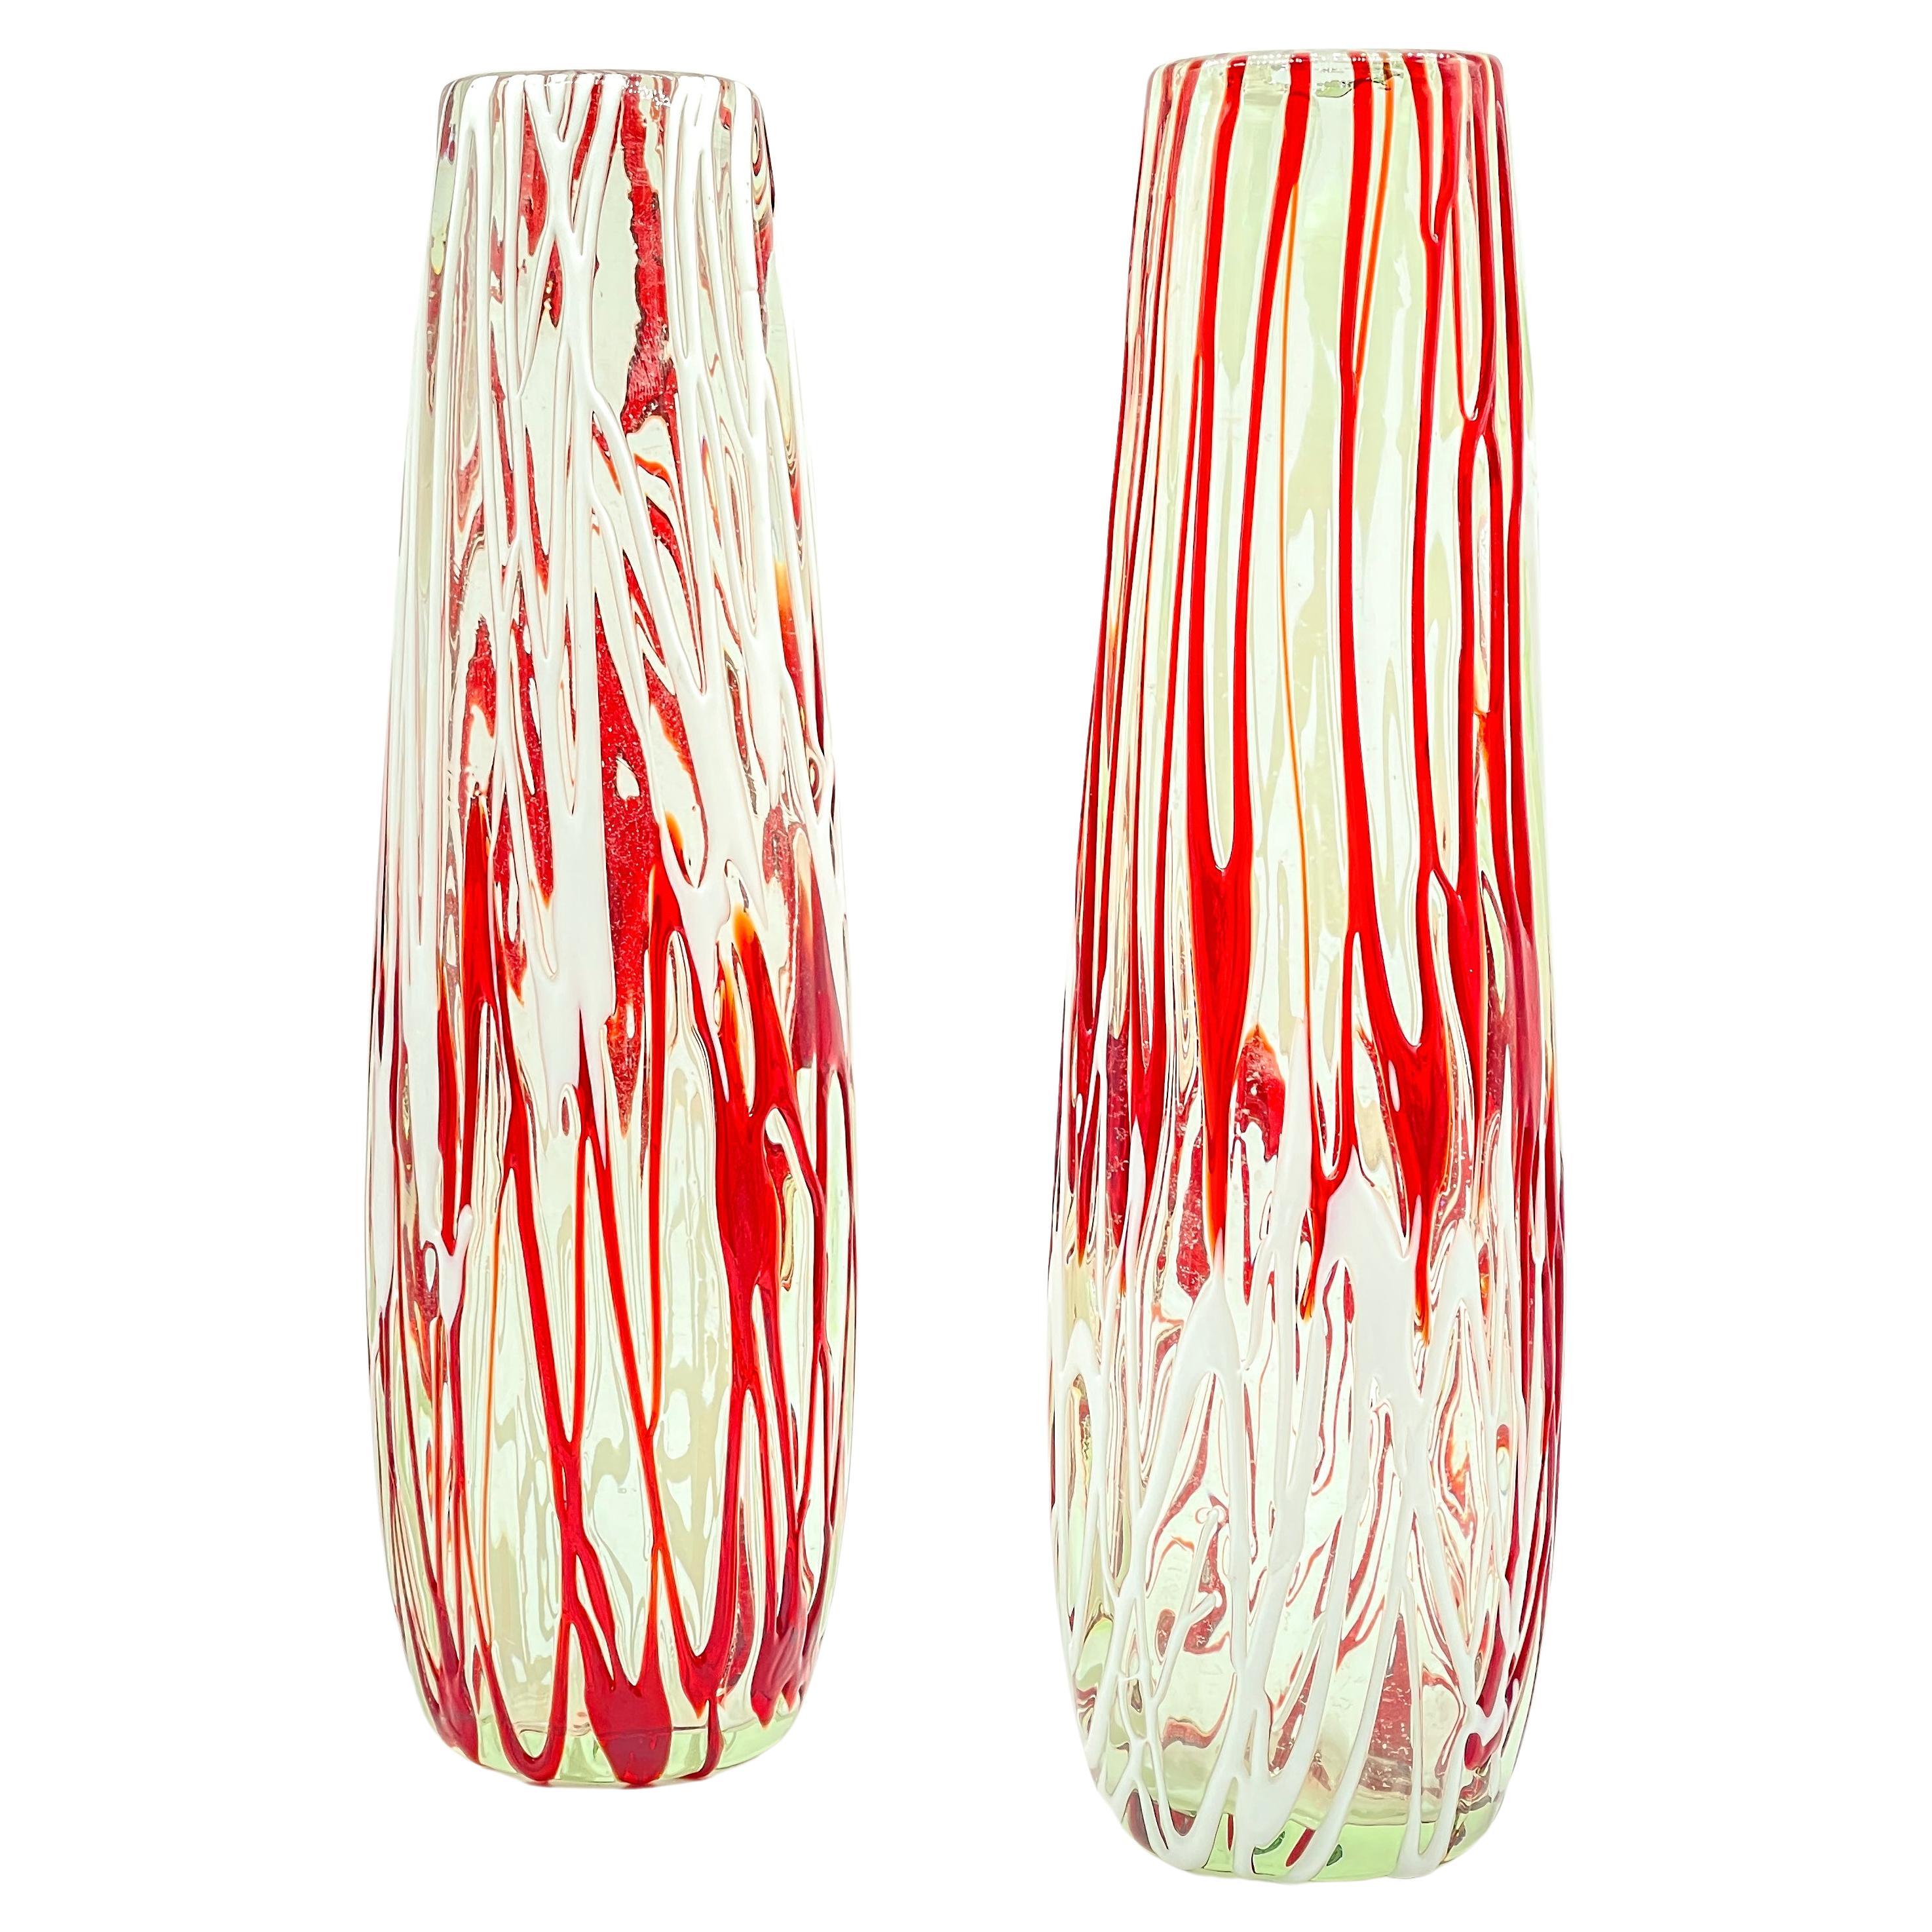 Pair of colorful Murano Vases in red and white